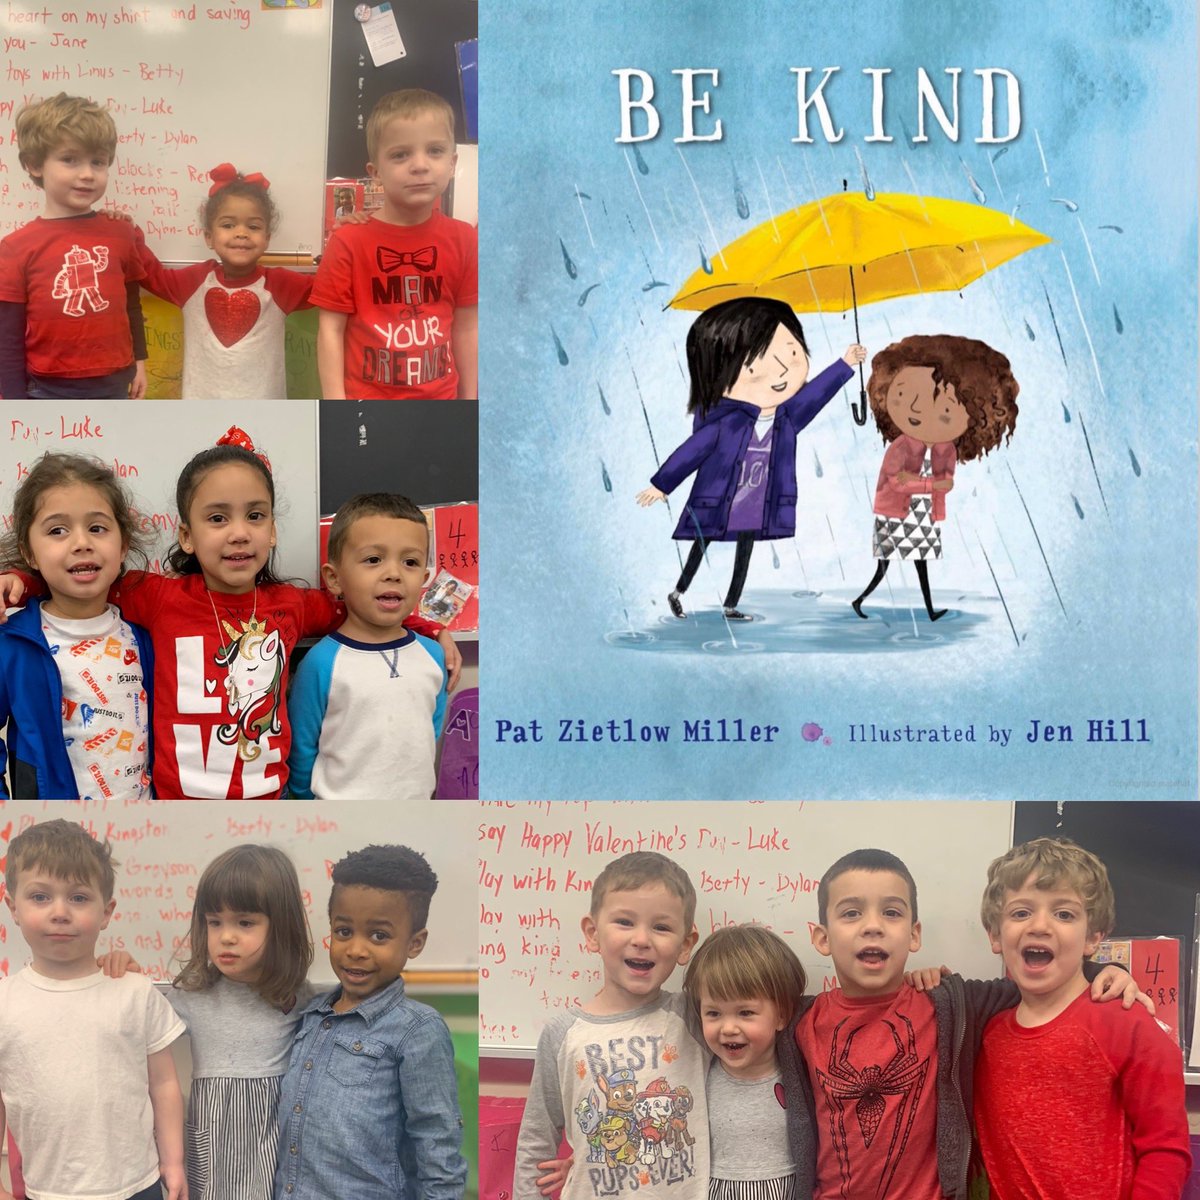 Happy Heart Day❤️ Mrs. English’s preschoolers celebrated kindness all week. We ended kindness week reading “Be Kind” youtu.be/t6NUJ2JZz50 #bekind #smallactsbigimpacts @CollsSharp